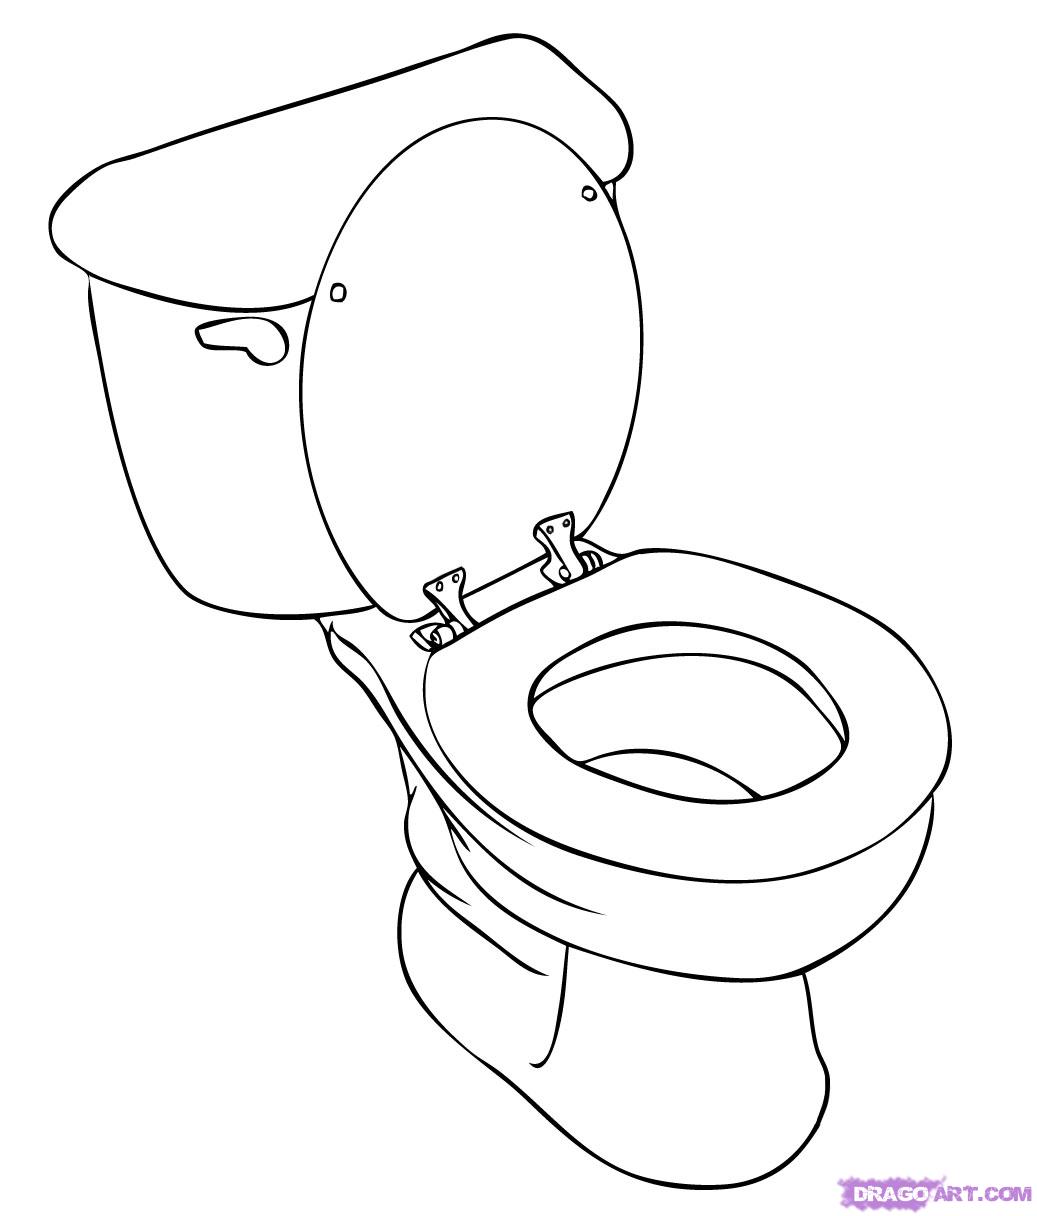 How To Draw A Toilet Step By Step Stuff Pop Culture Free Online